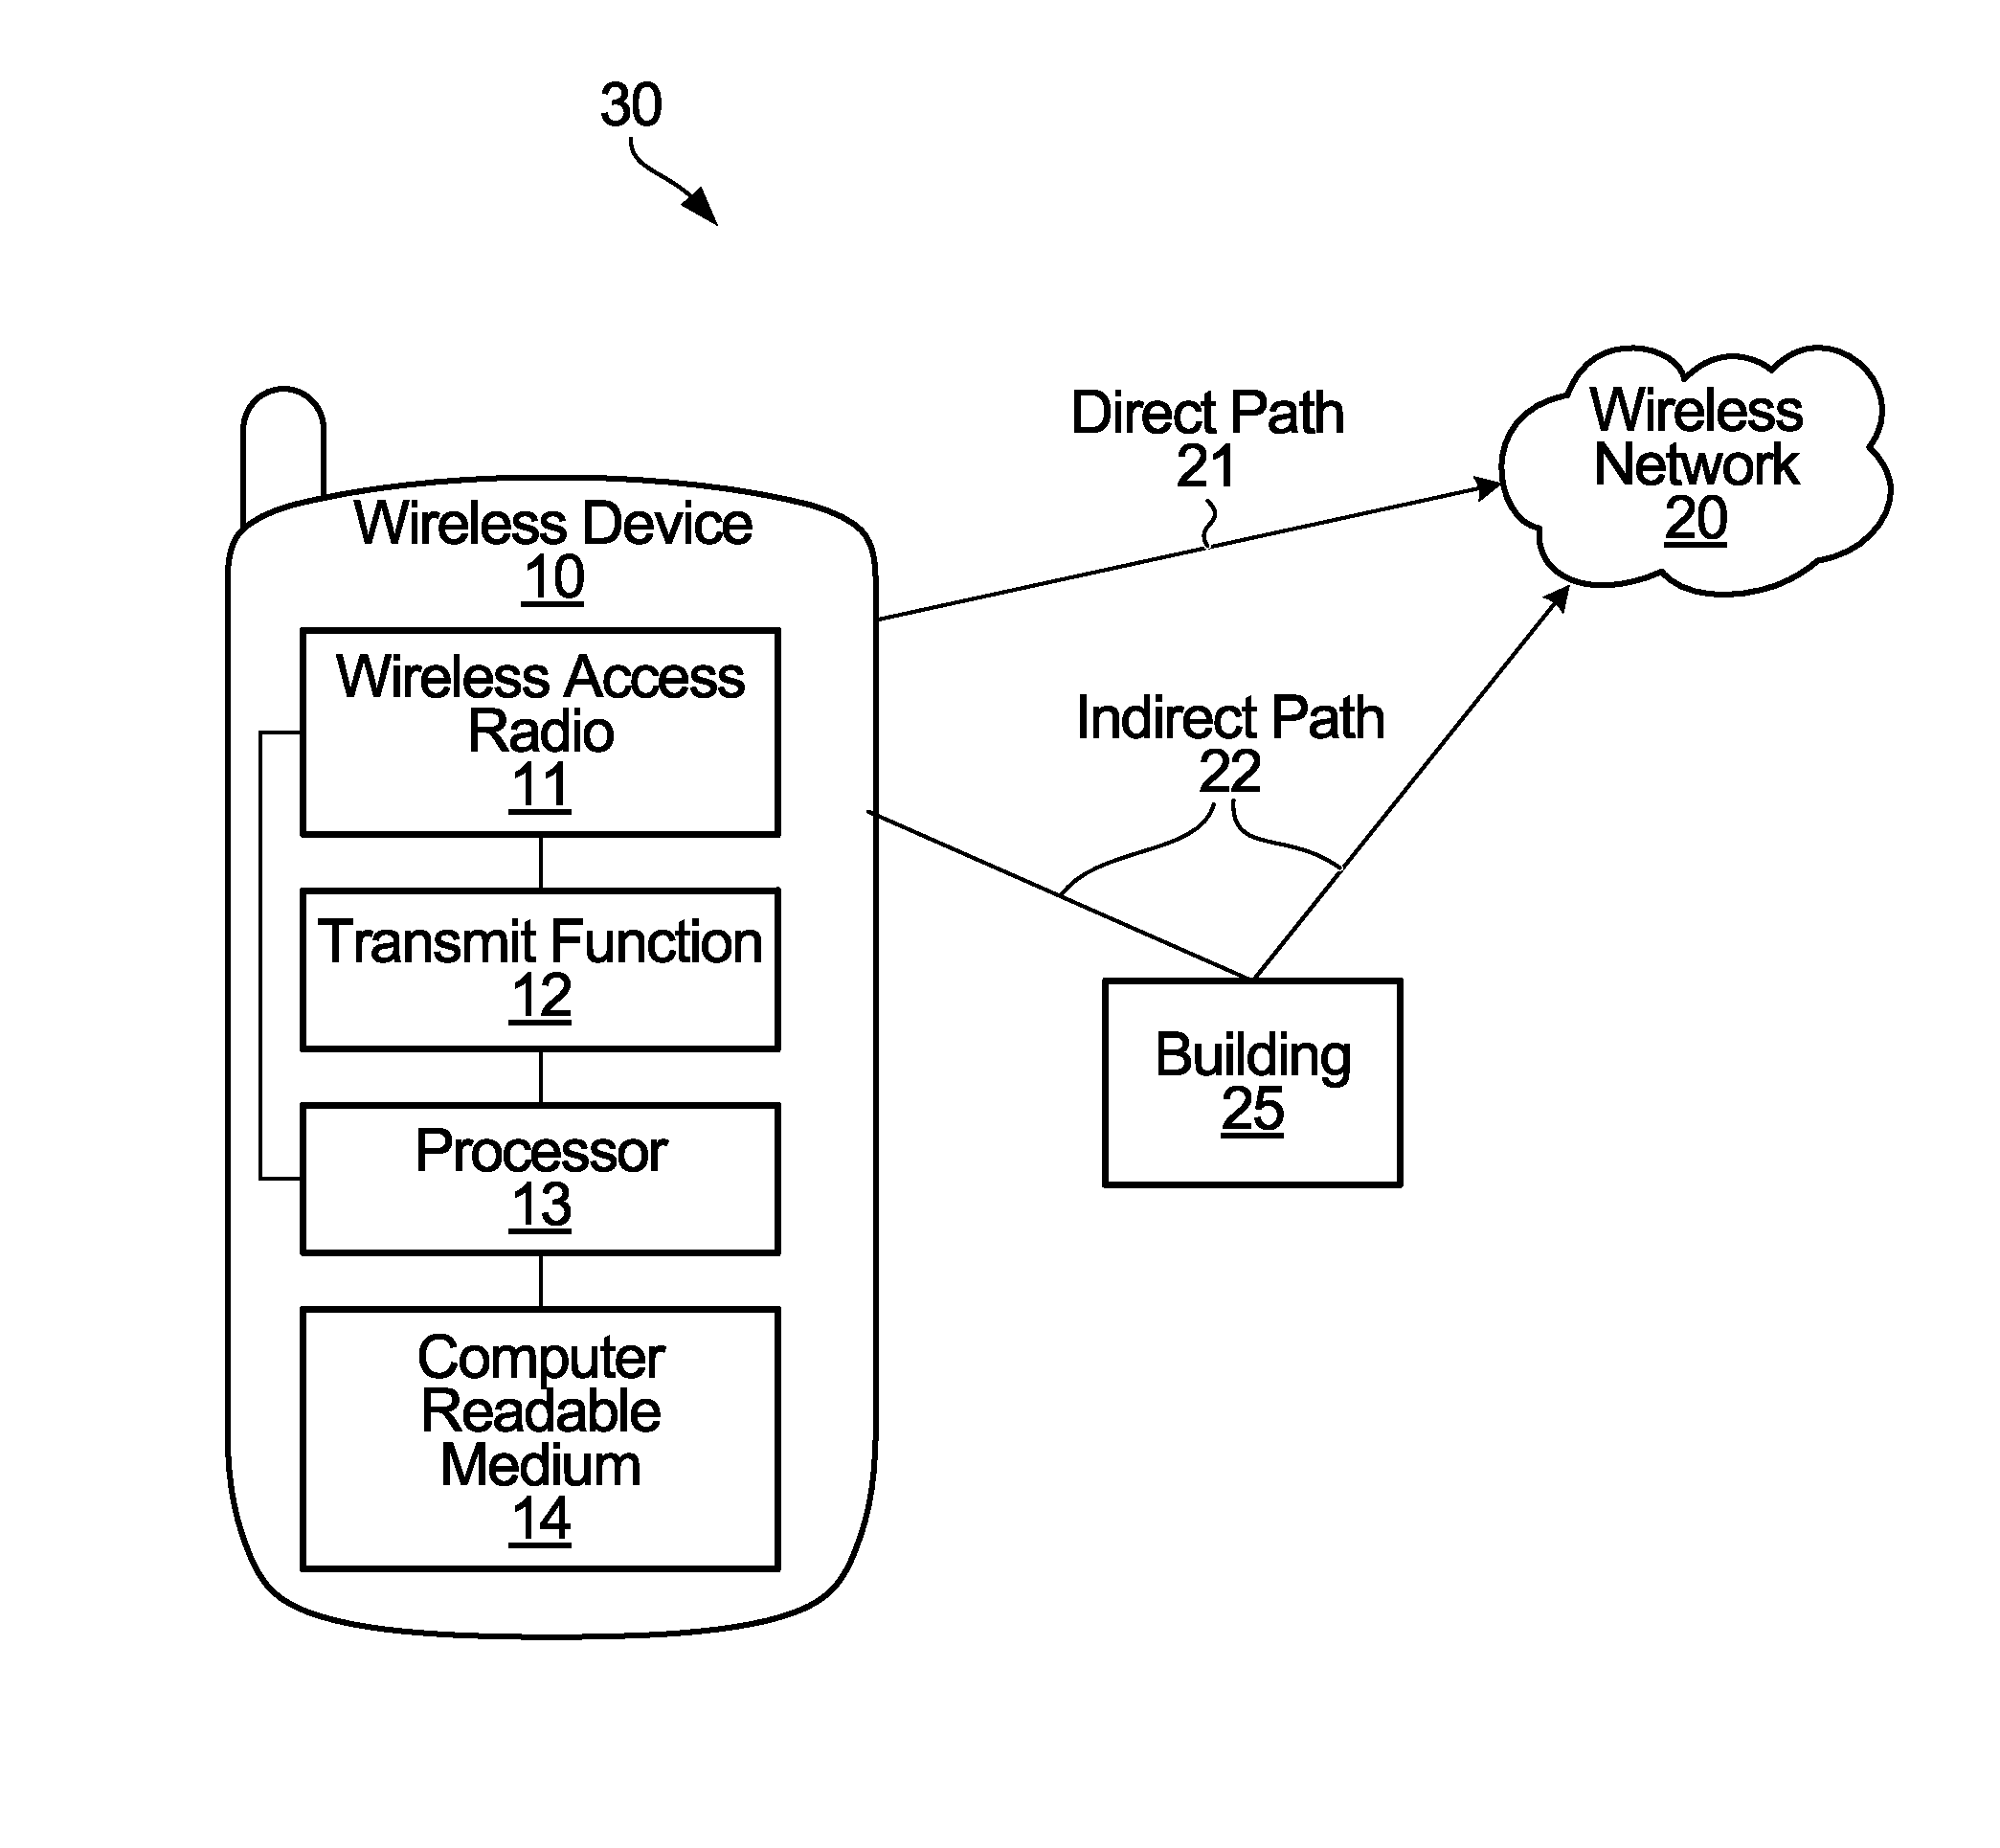 Apparatus and method for transmitting data with conditional zero padding